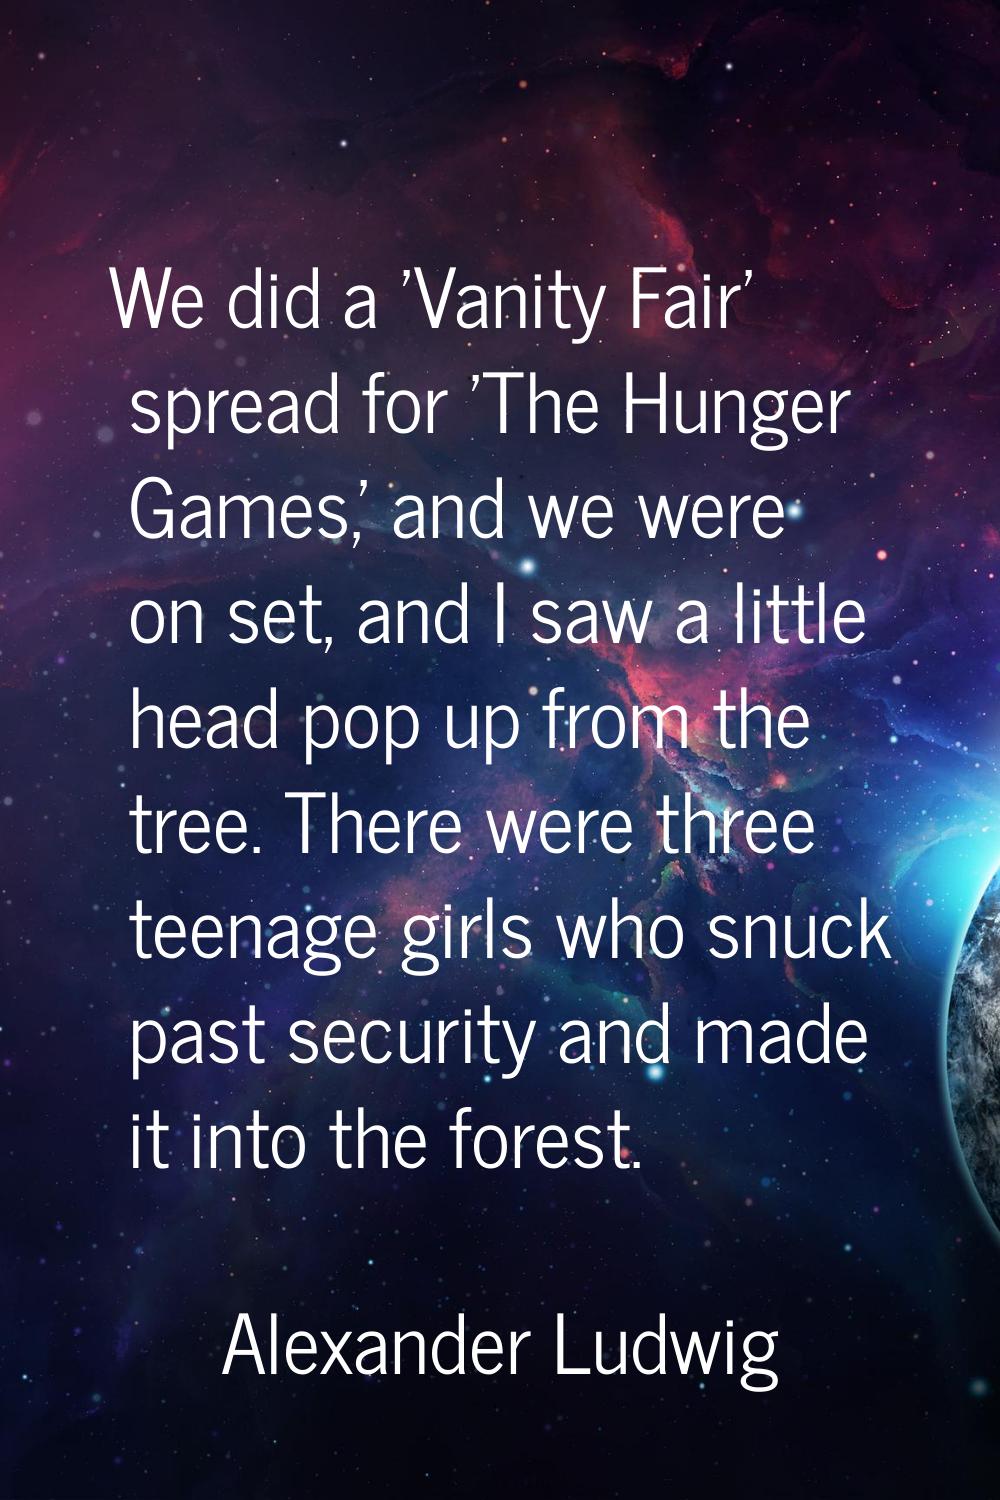 We did a 'Vanity Fair' spread for 'The Hunger Games,' and we were on set, and I saw a little head p